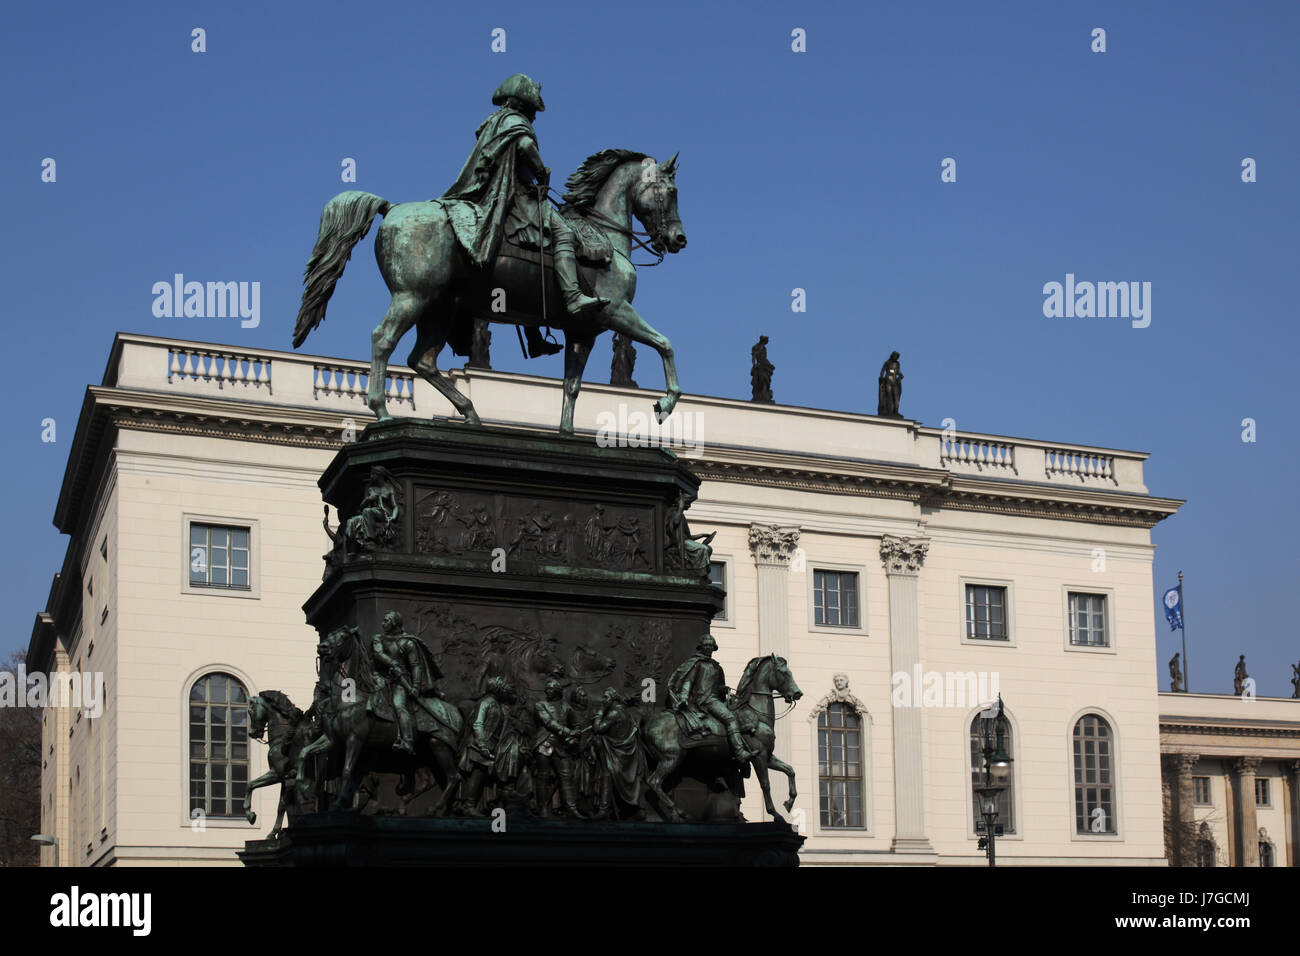 equestrian statue of frederick the great in berlin Stock Photo